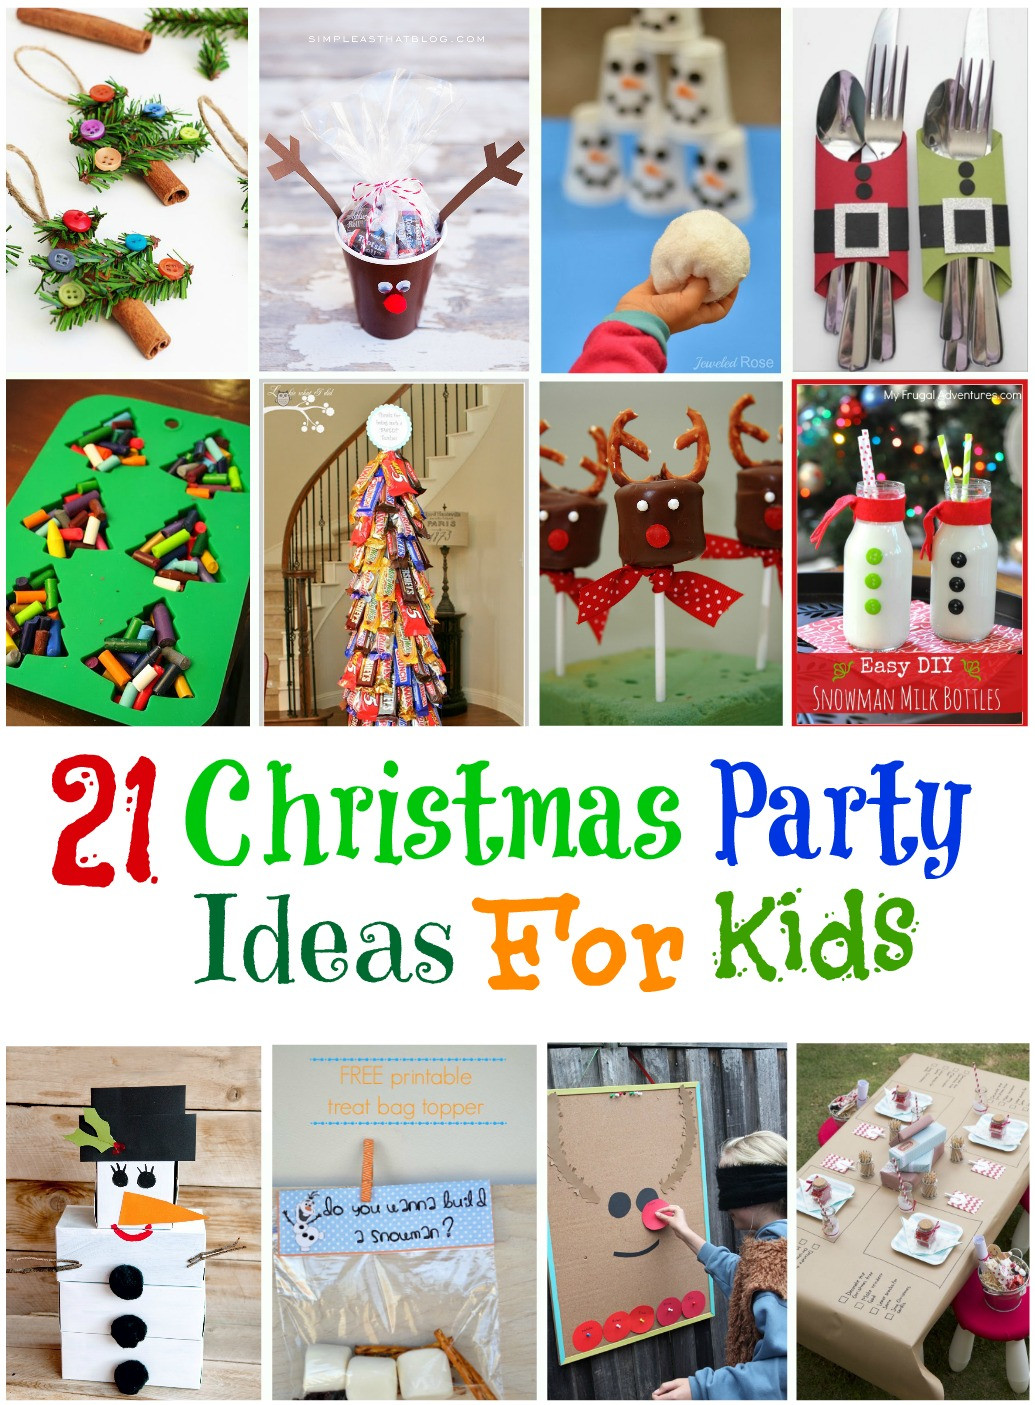 Ideas For Family Christmas Party
 21 Amazing Christmas Party Ideas for Kids